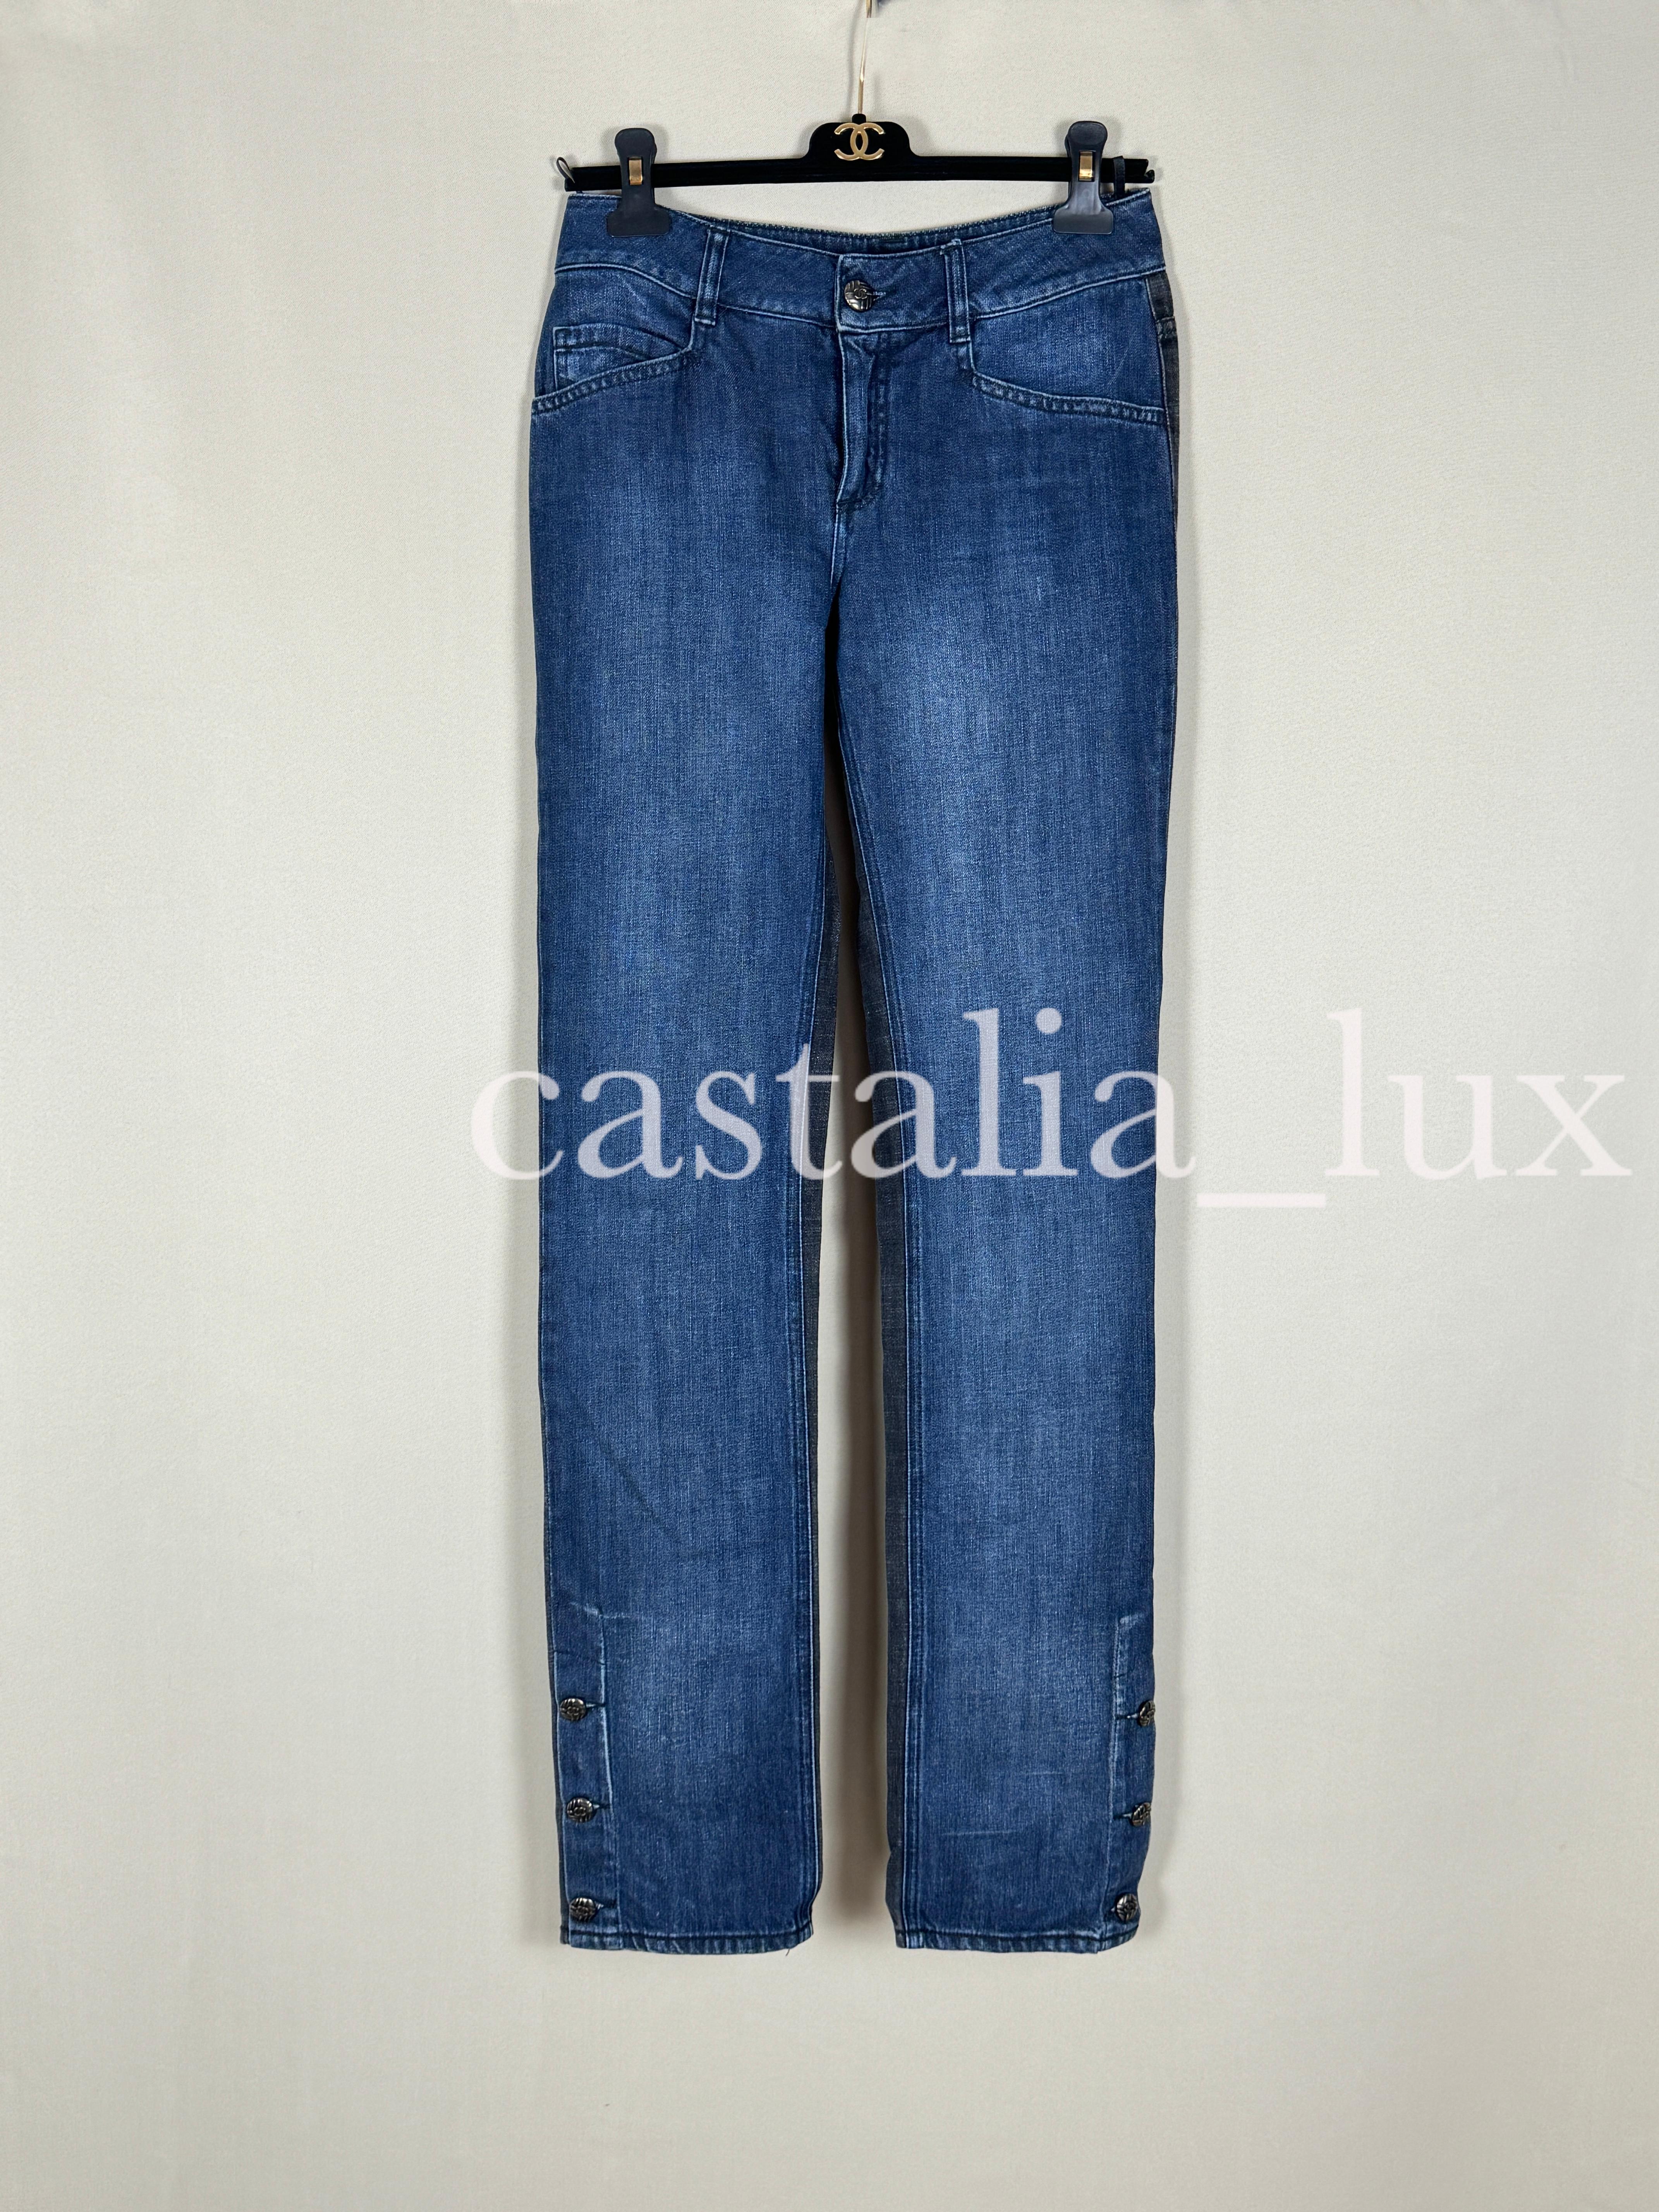 Chanel CC Buttons Bicolour Jeans In Excellent Condition For Sale In Dubai, AE